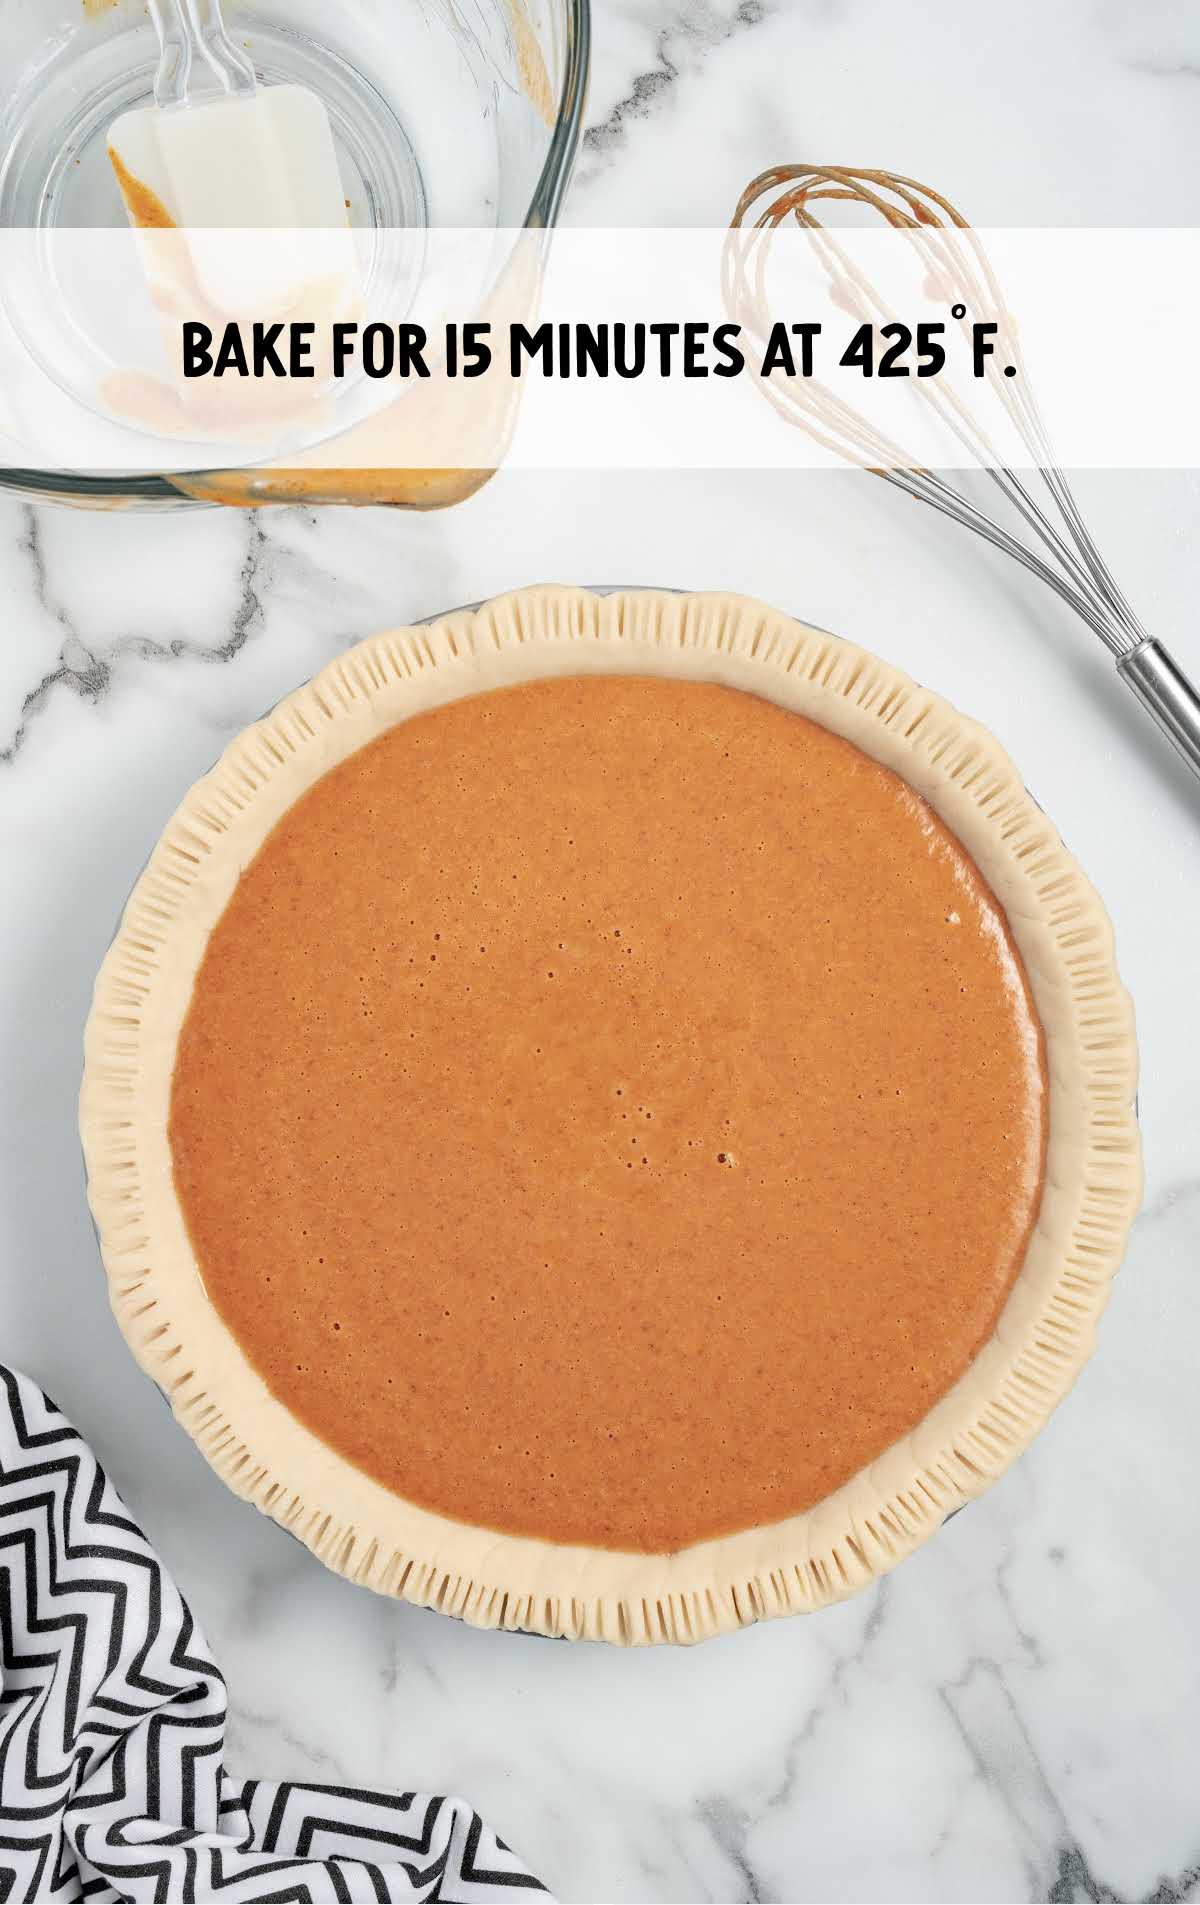 bake pie for 15 minutes